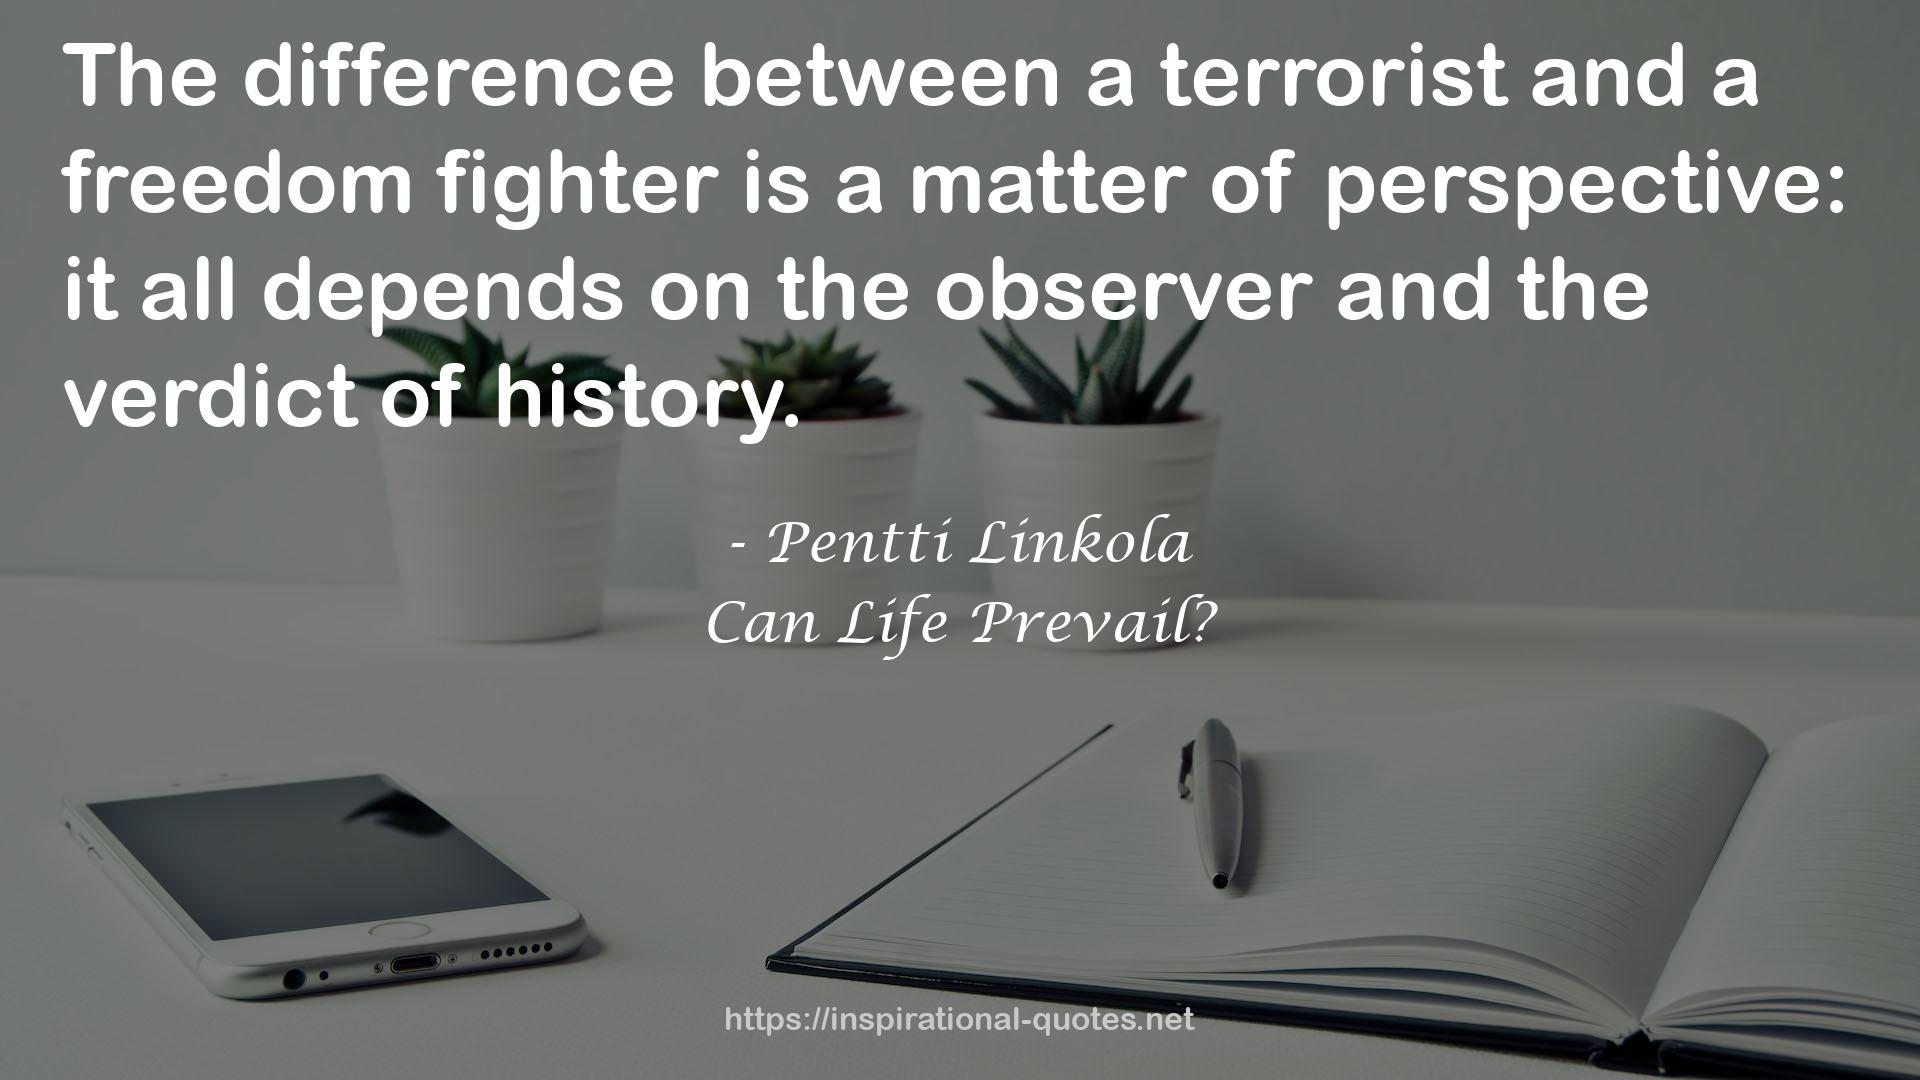 Can Life Prevail? QUOTES